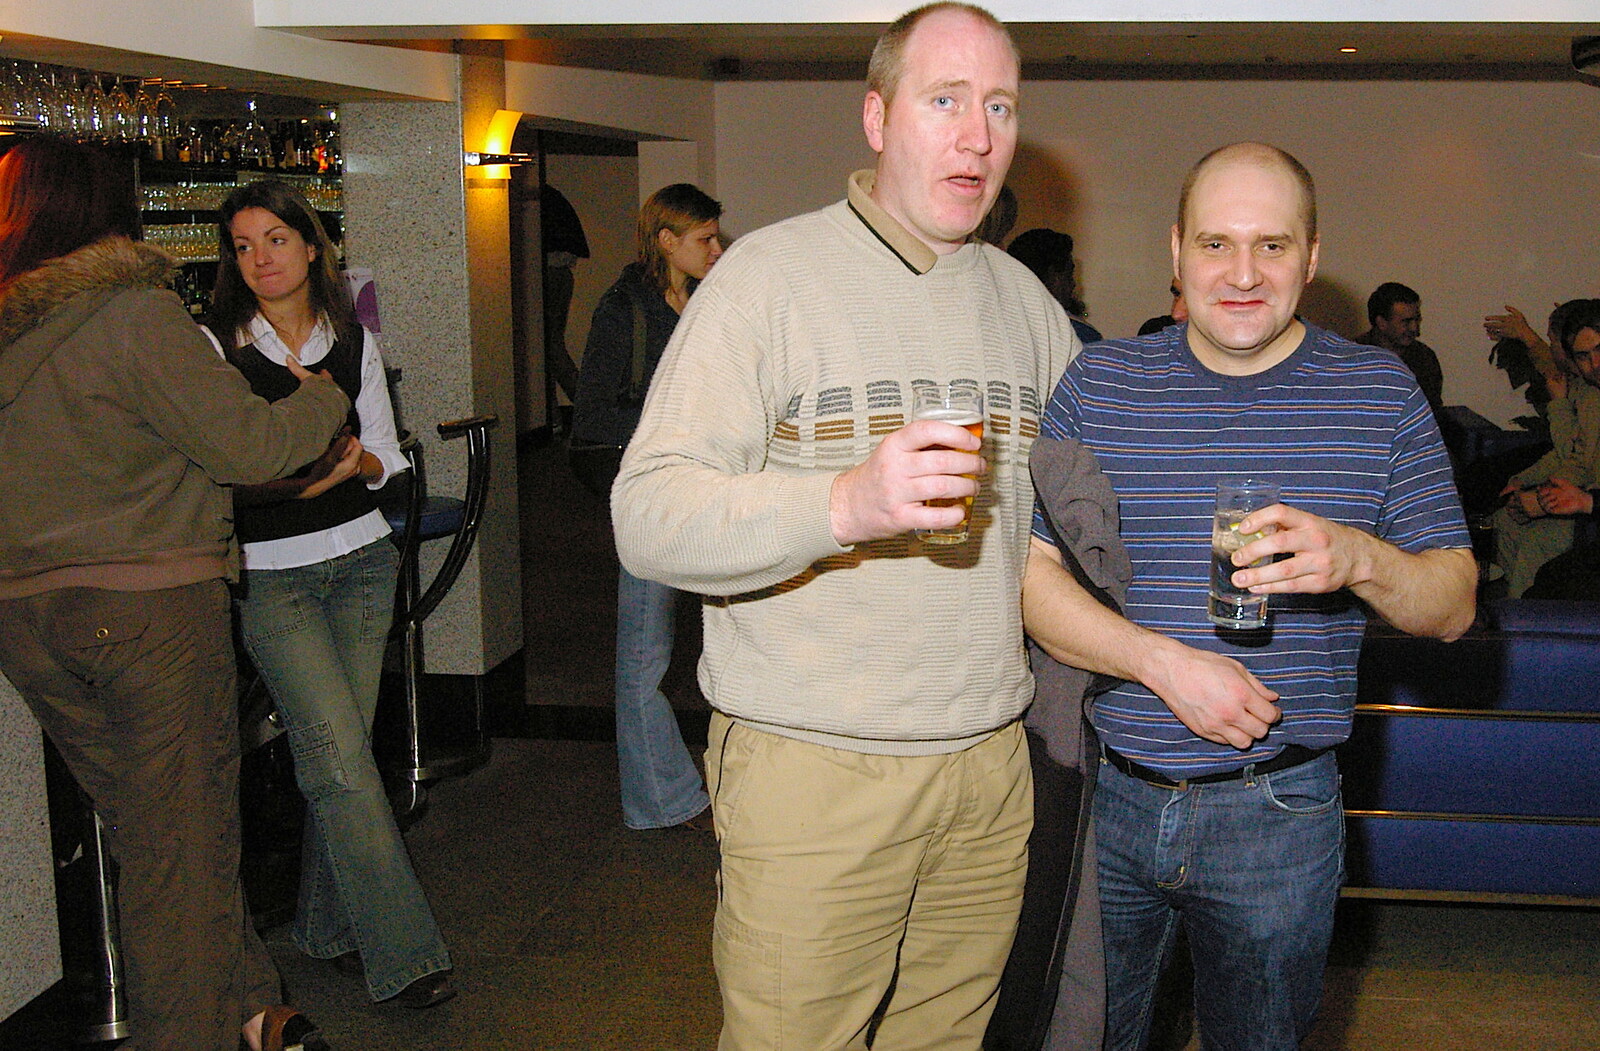 Russell and Francis from Qualcomm goes Karting in Caxton, Cambridgeshire - 7th November 2005